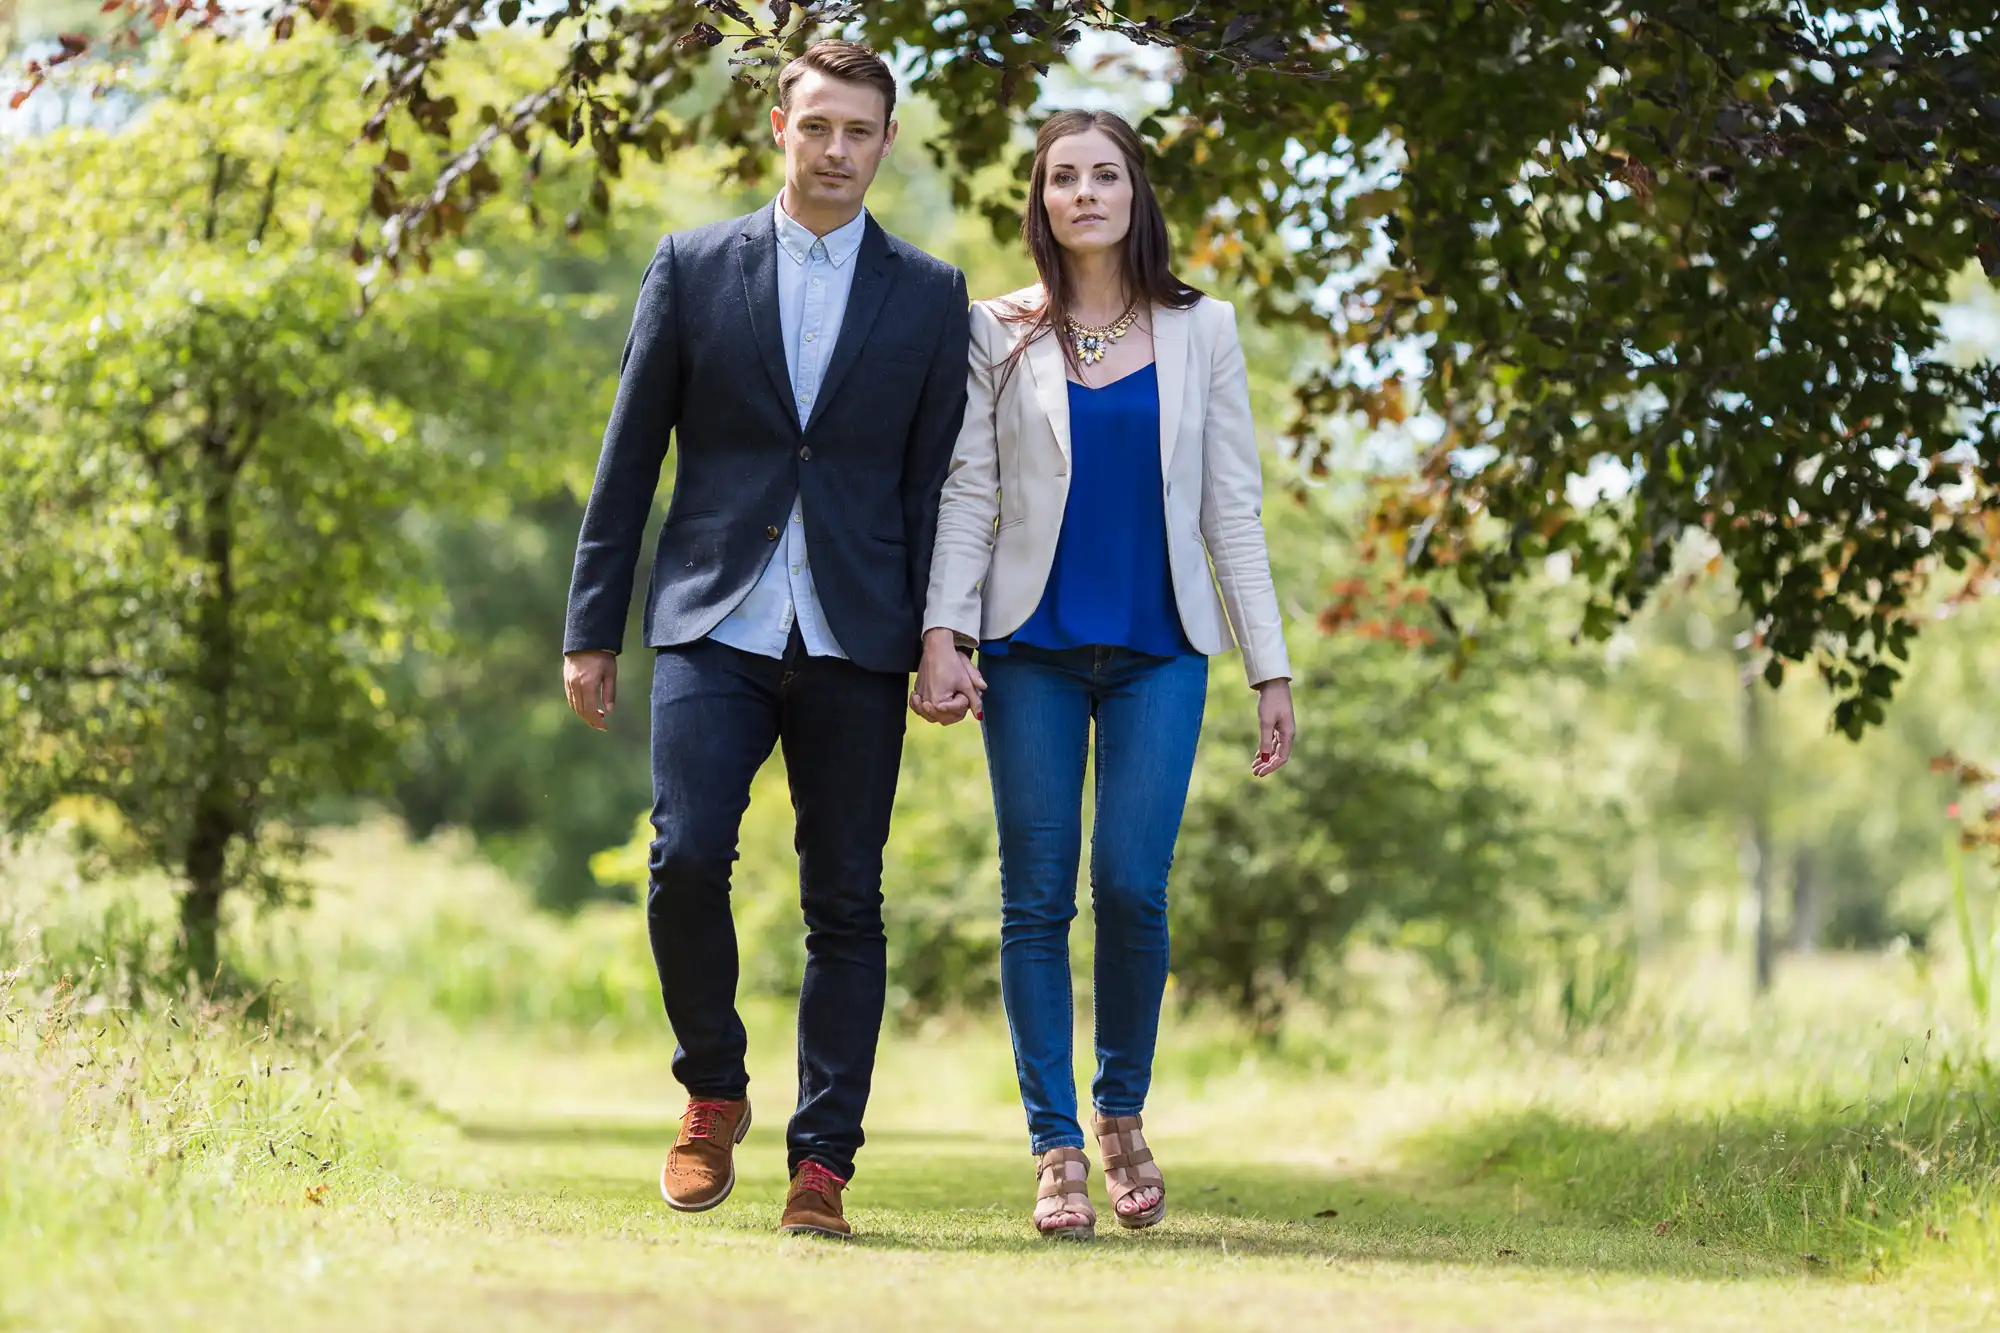 A young couple holding hands while walking down a sunny, tree-lined path. the man is wearing a blazer and jeans, and the woman is dressed in a blazer and jeans.